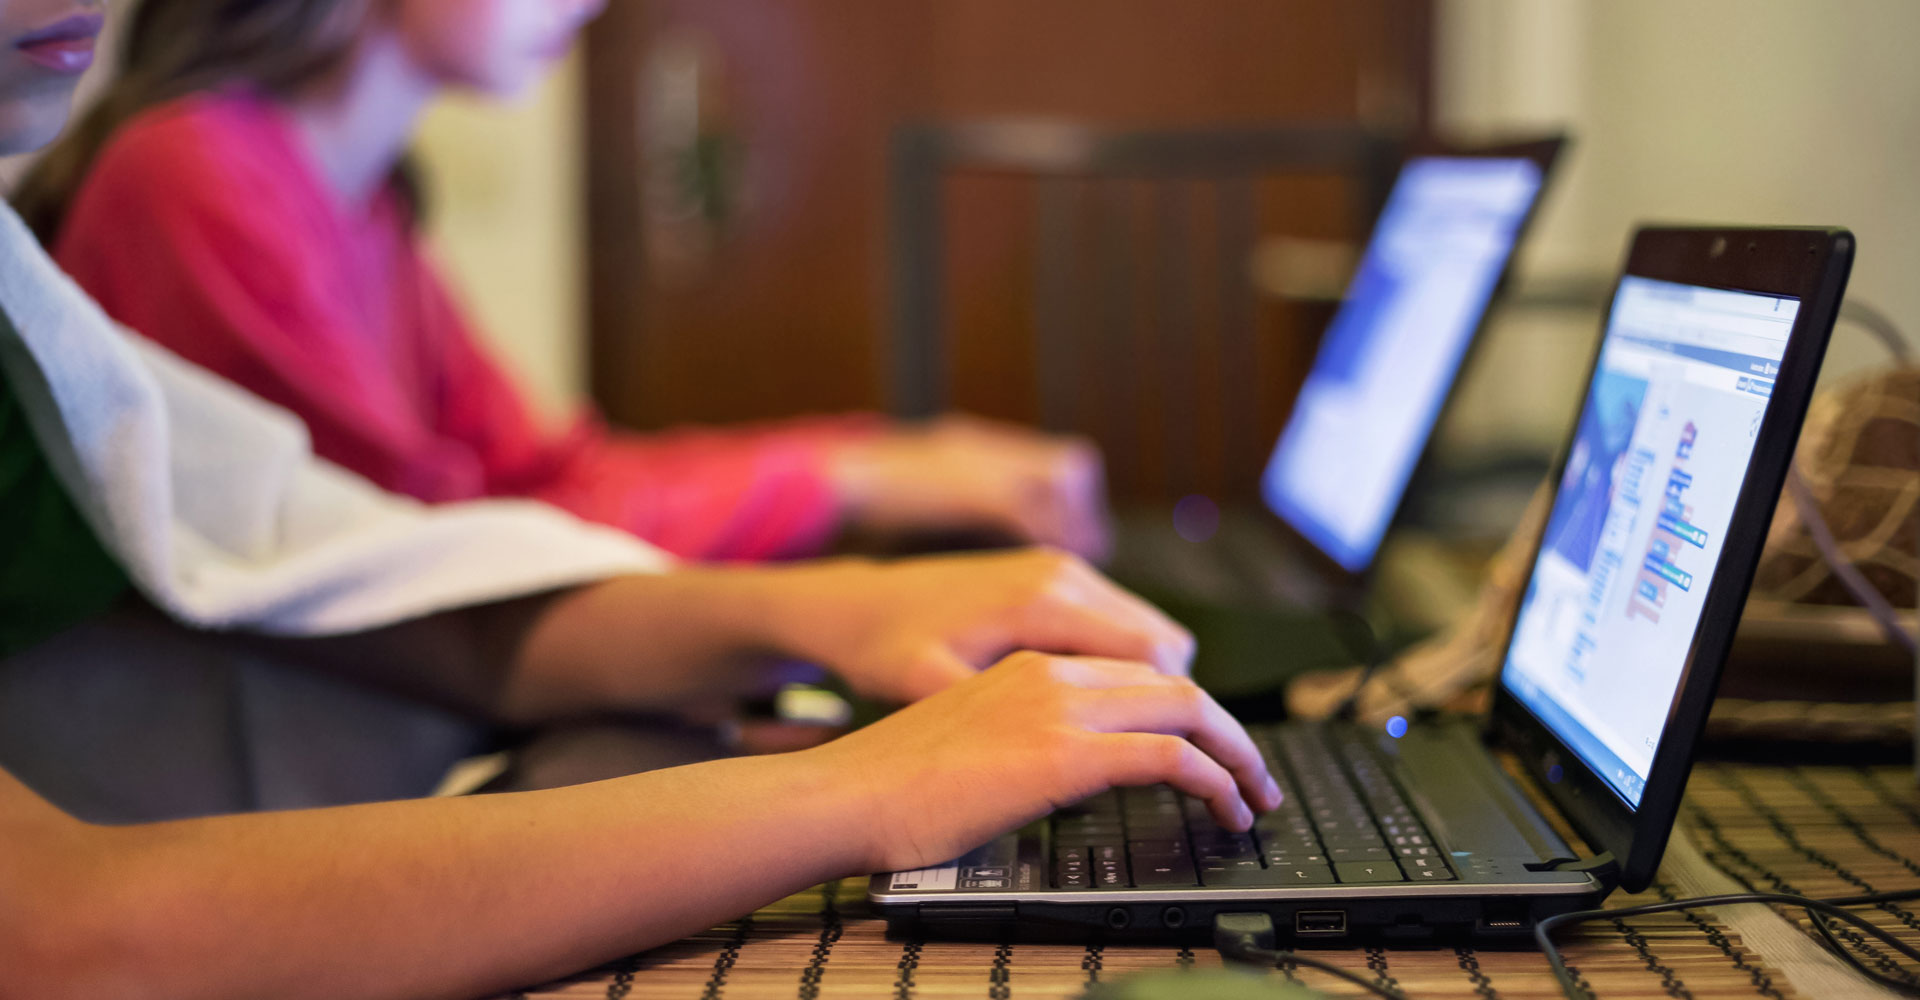 Kids are forming hacking groups online. Here’s what to do about it.